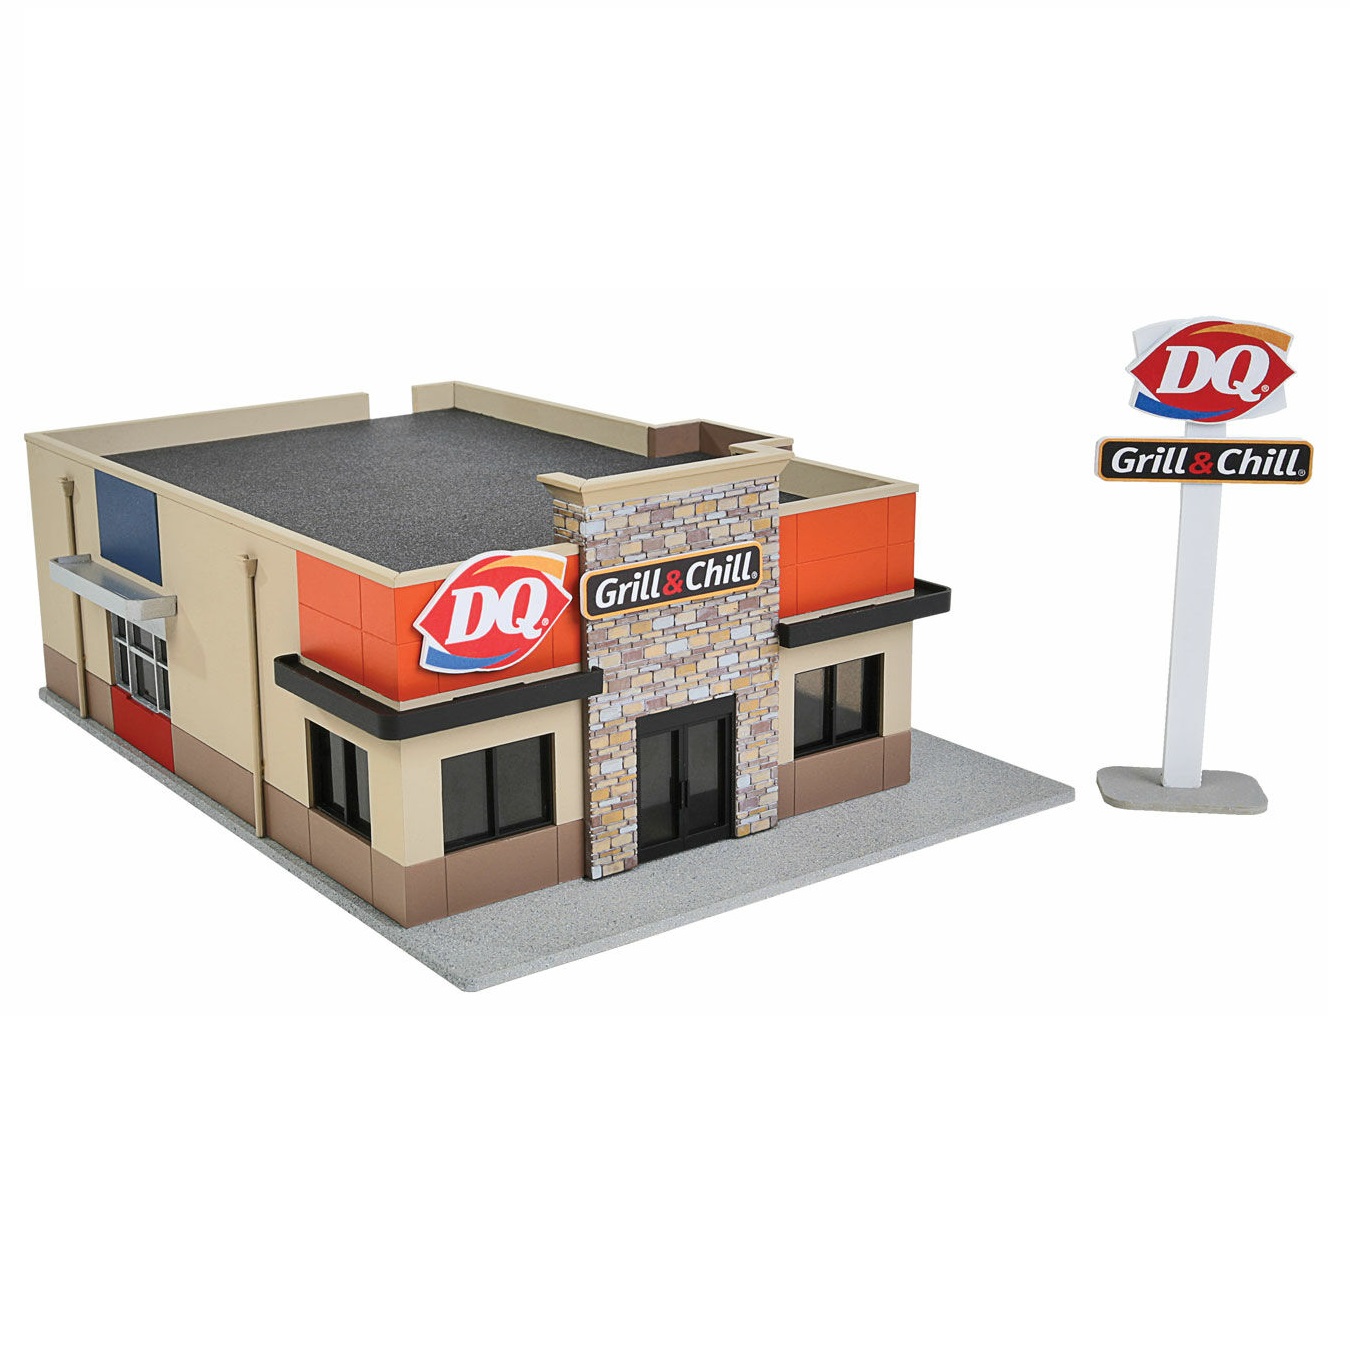 DQ® Grill & Chill HO